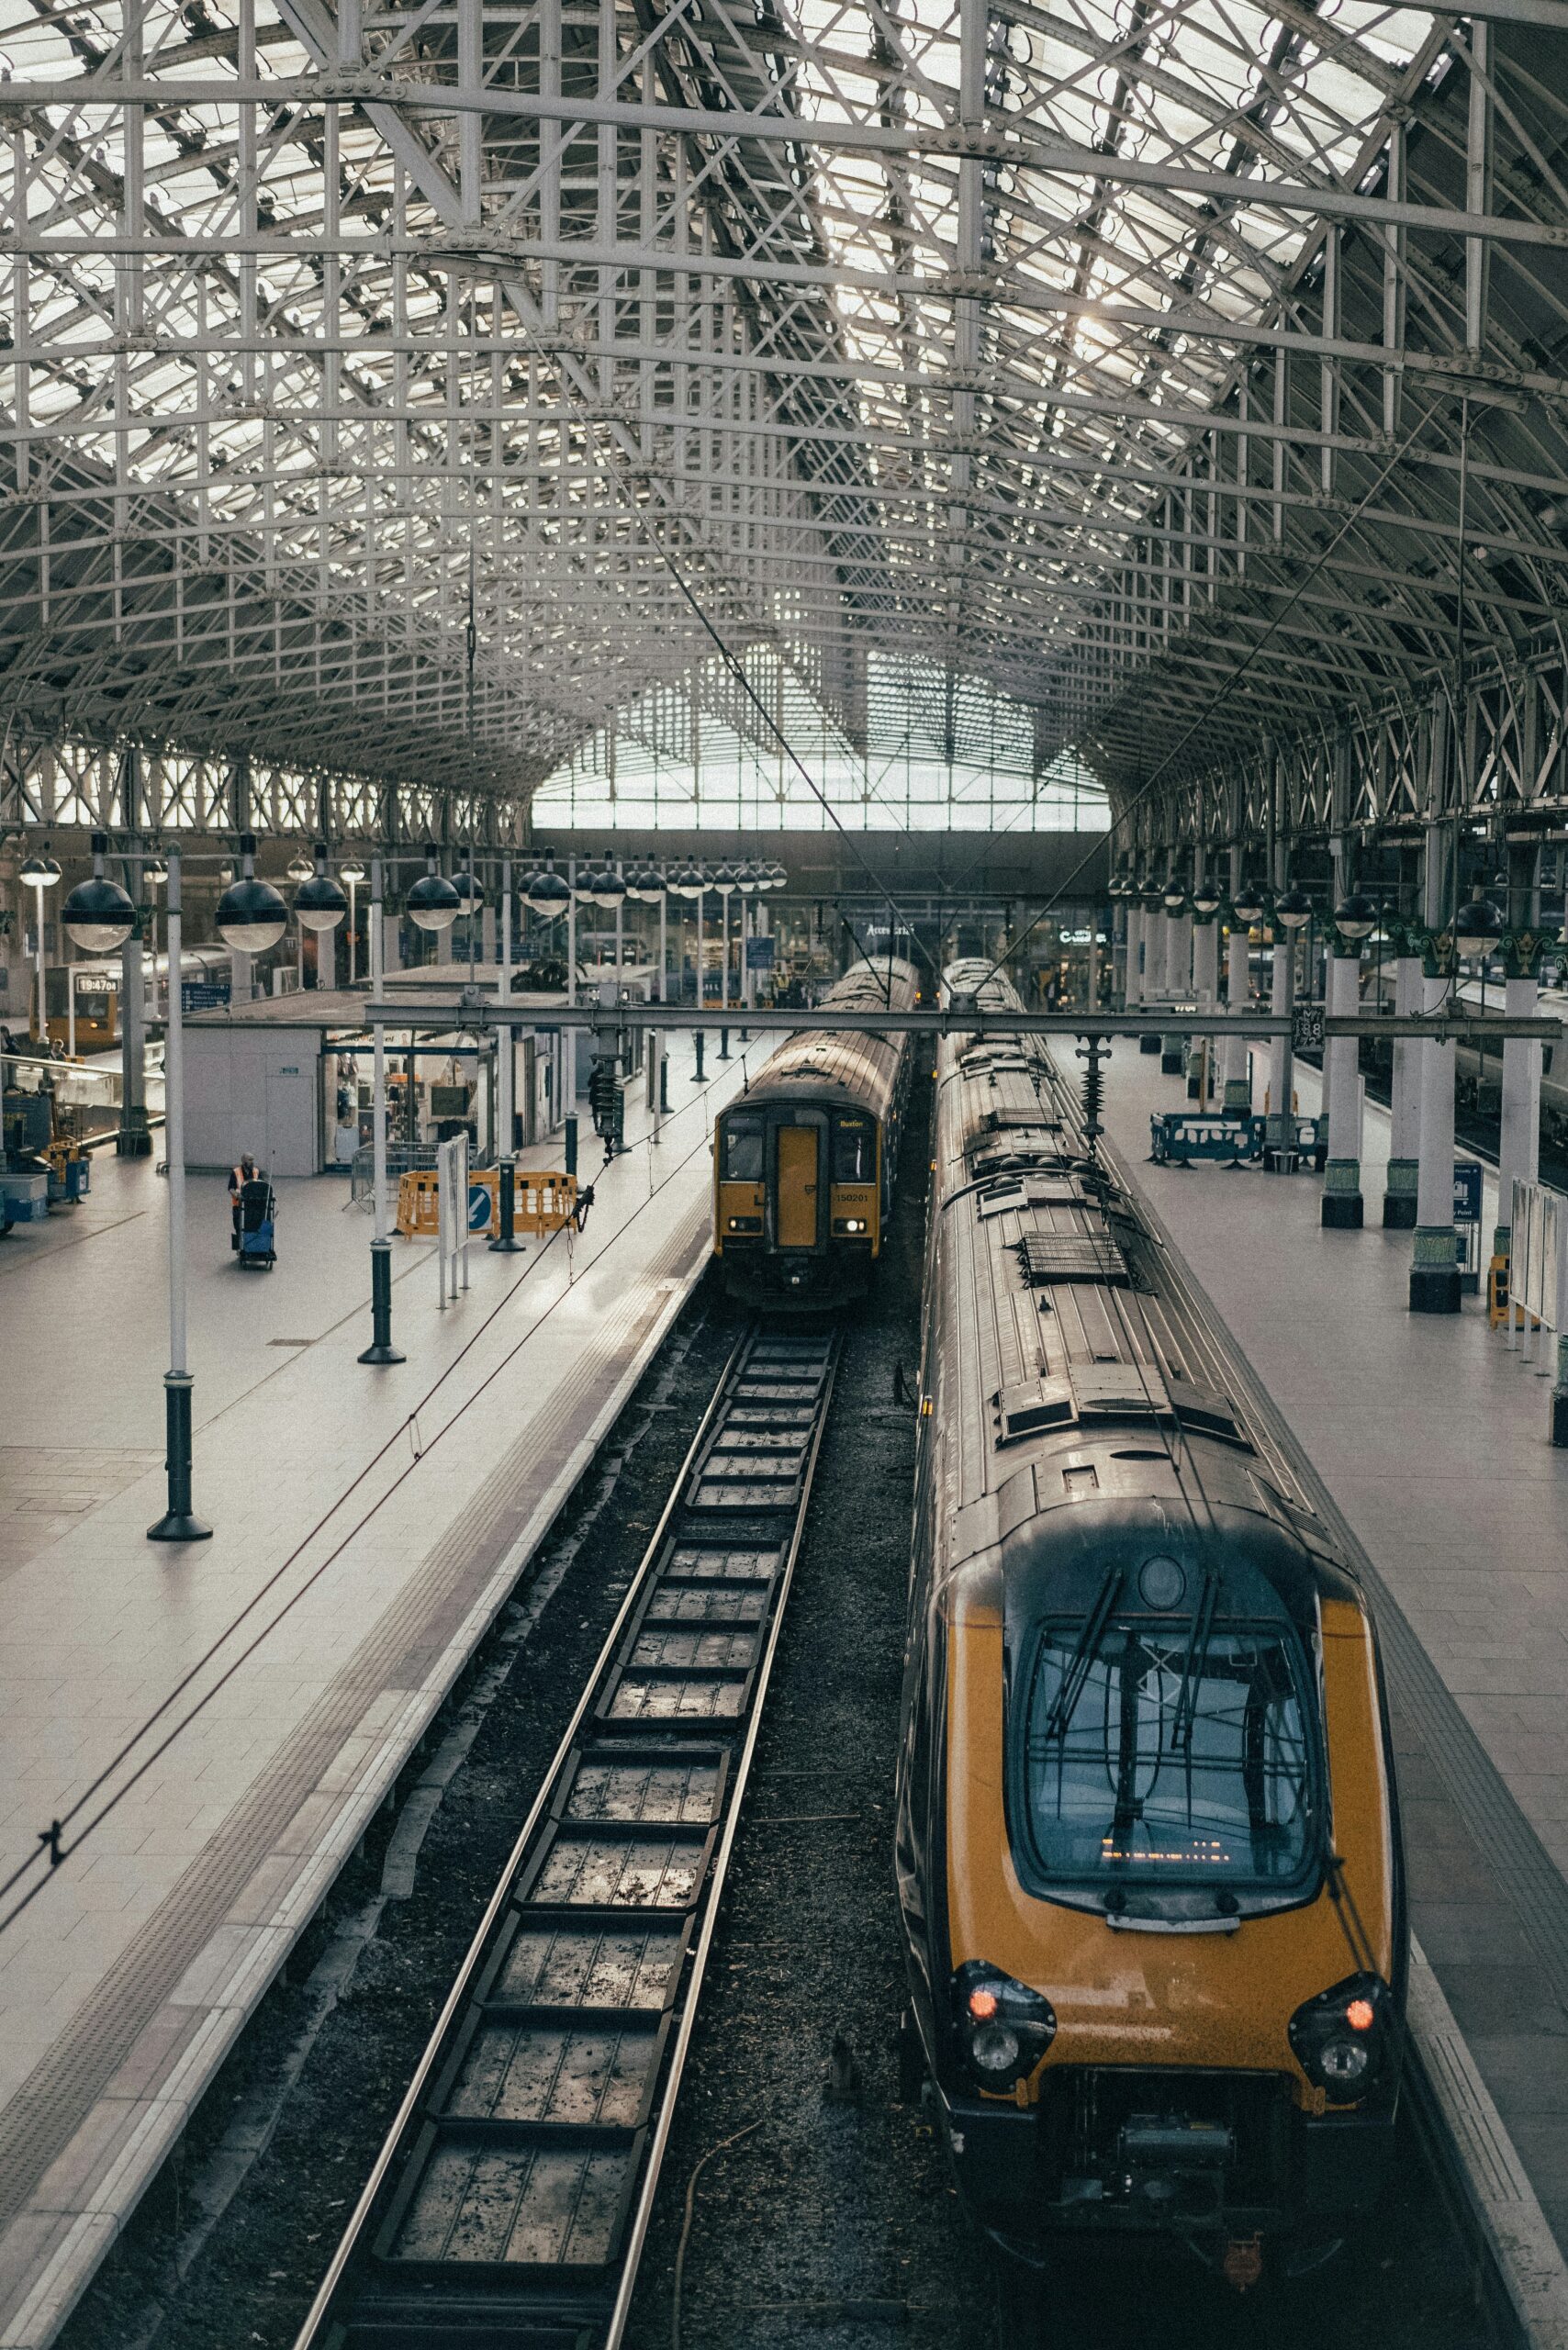 Why work in the rail industry?